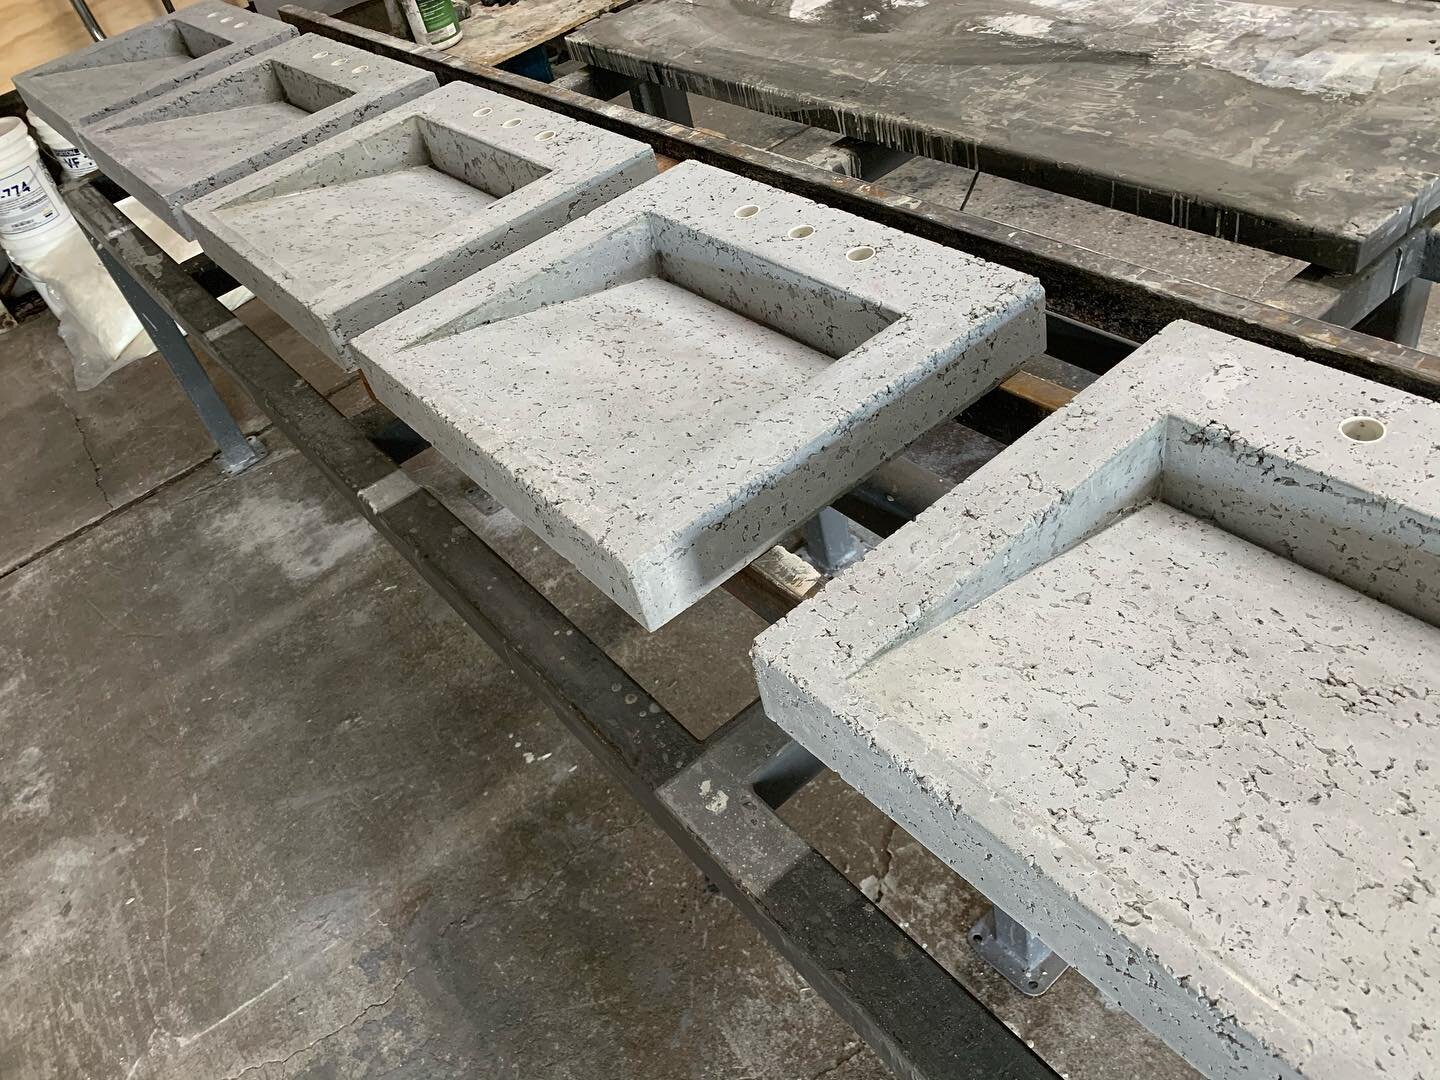 Our standard dry packed finish, fresh out of the mold #handpackedconcrete #concretesink #concretewedgesink #concreterampsink #concretebathroom #modernbathroom  #bathroomdesign #concretedesign #stogsconcretedesign #shipsnationwide